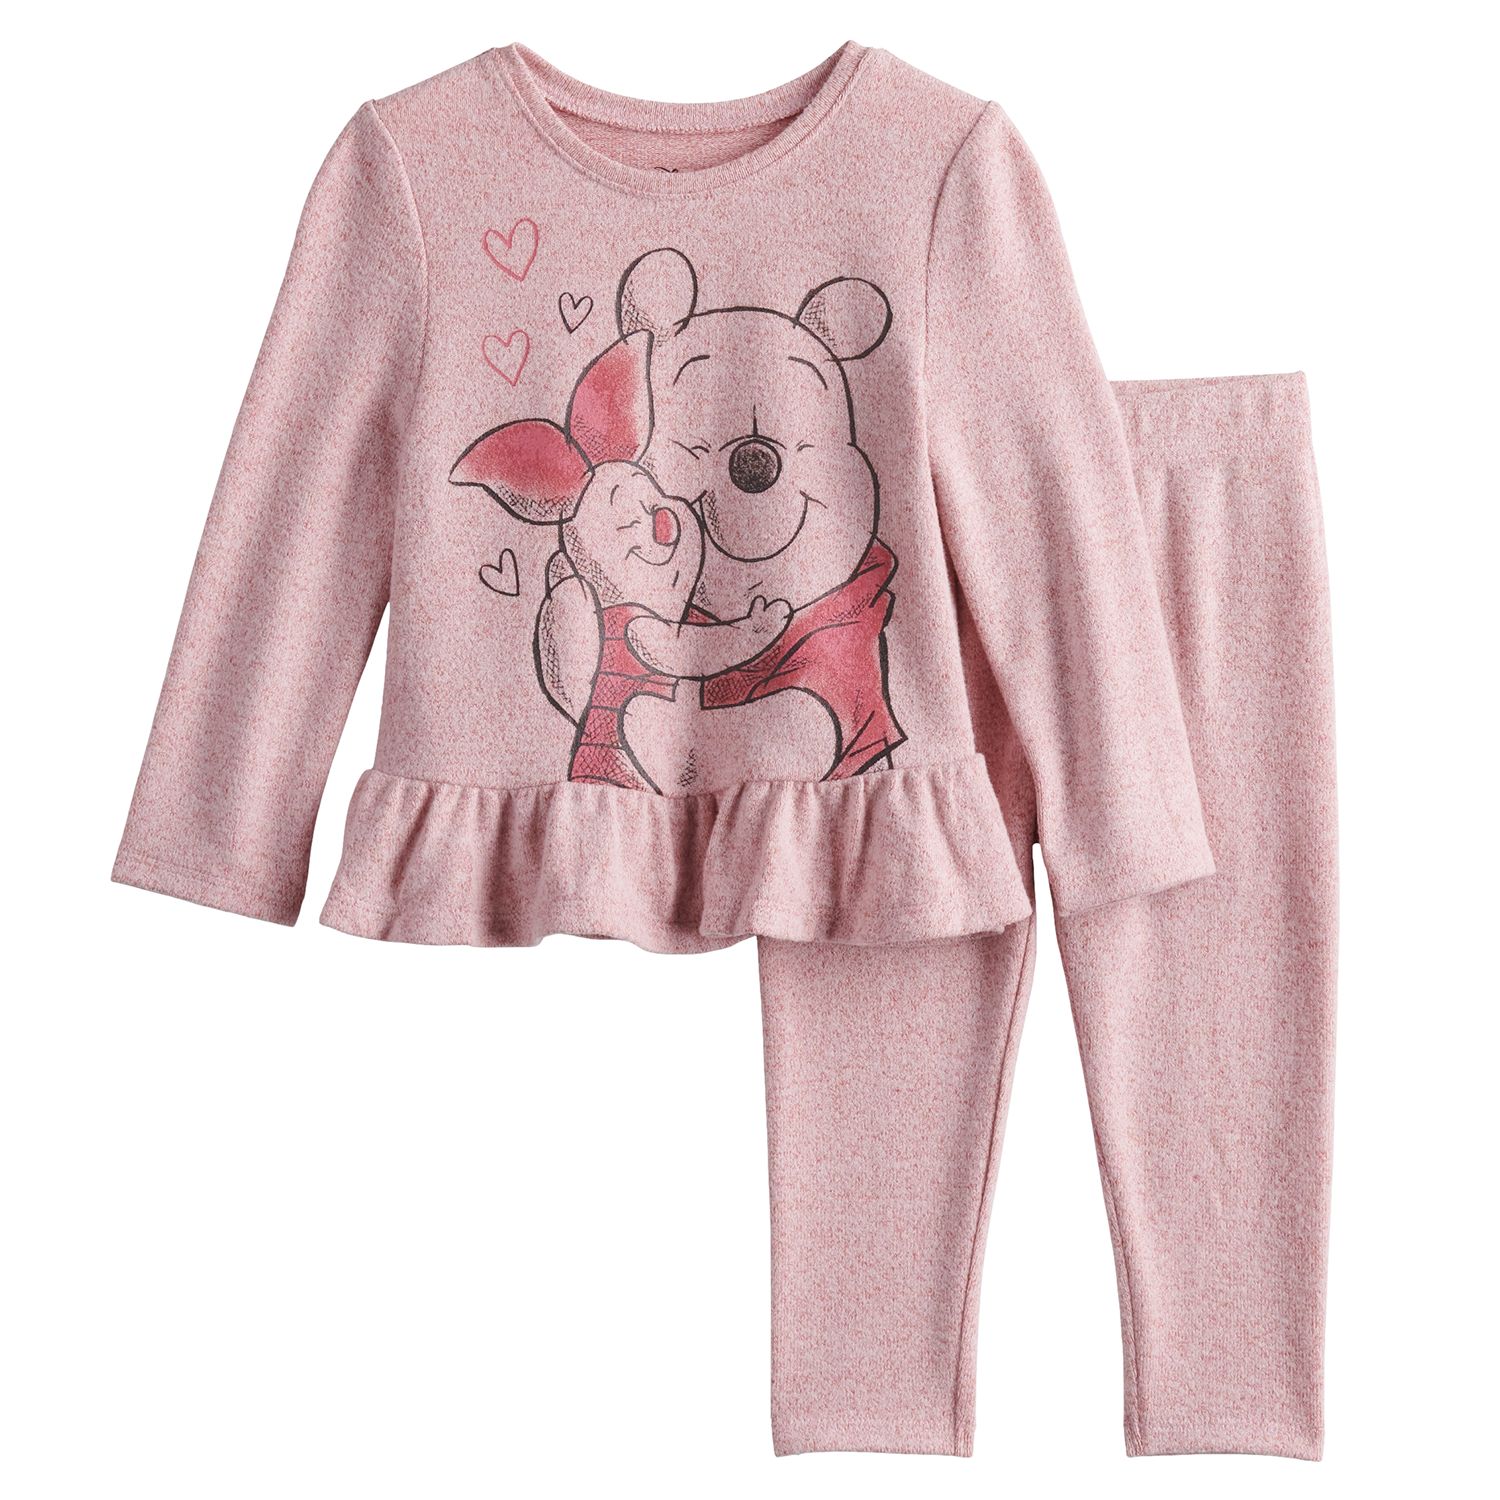 Image for Disney/Jumping Beans Disney's Winnie The Pooh Baby Girl Peplum Top & Leggings Set by Jumping Beans® at Kohl's.